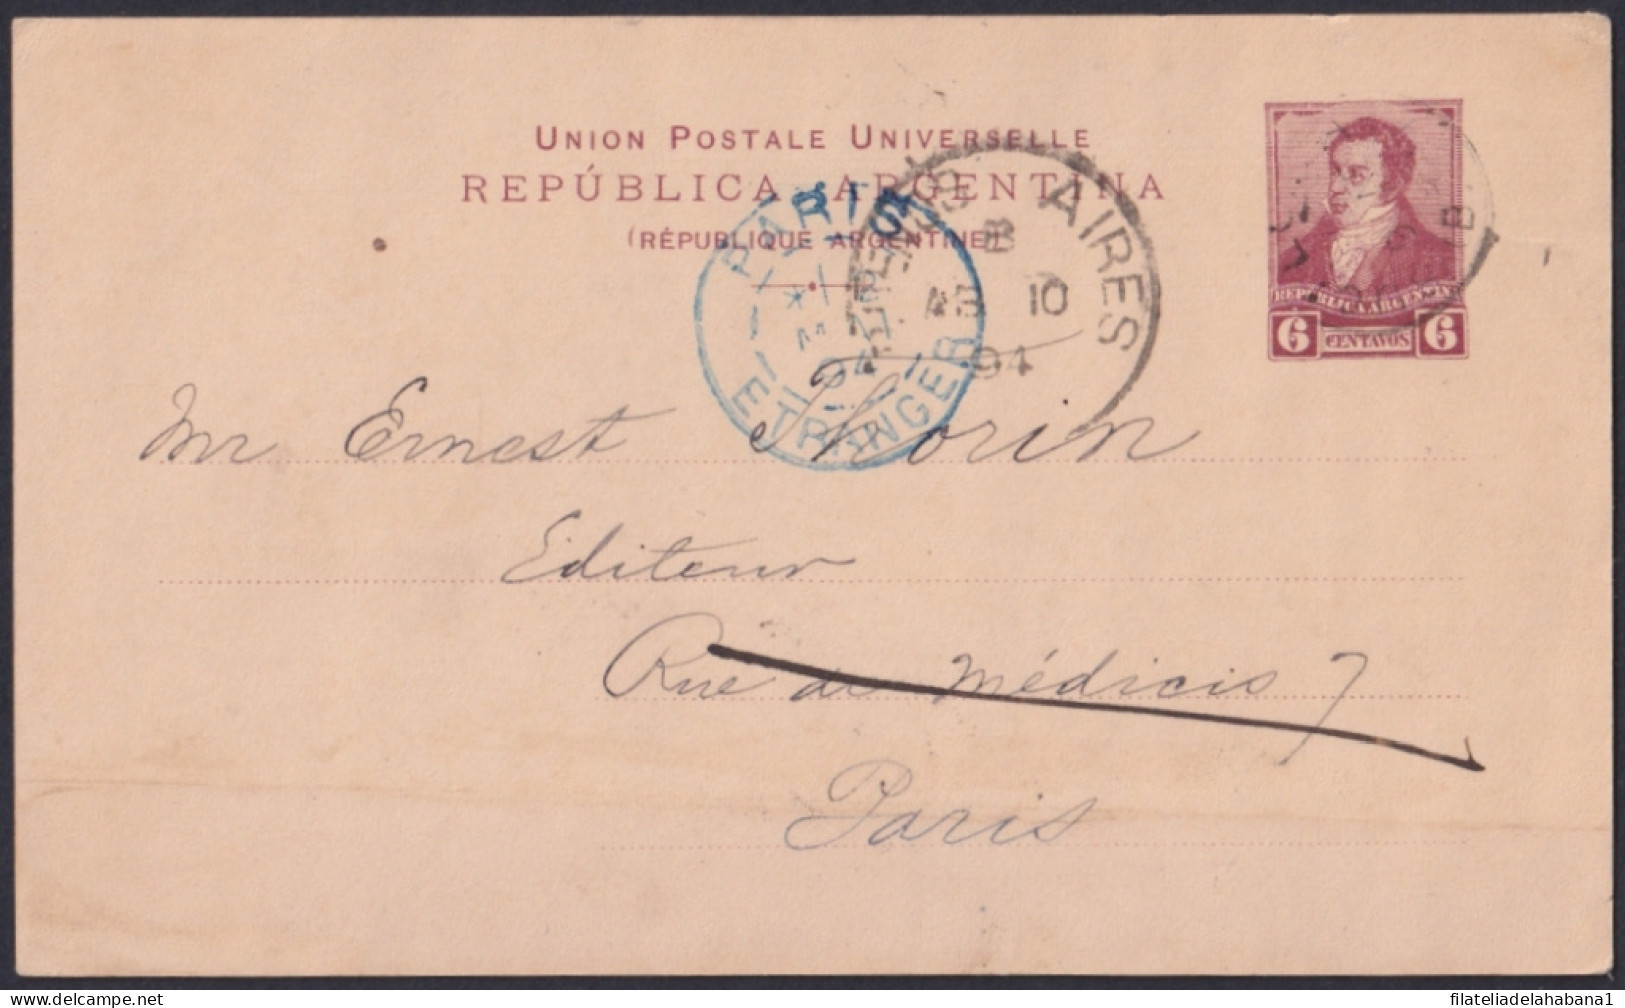 F-EX48665 ARGENTINA 1894 6c POSTAL STATIONERY TO FRANCE.  - Covers & Documents